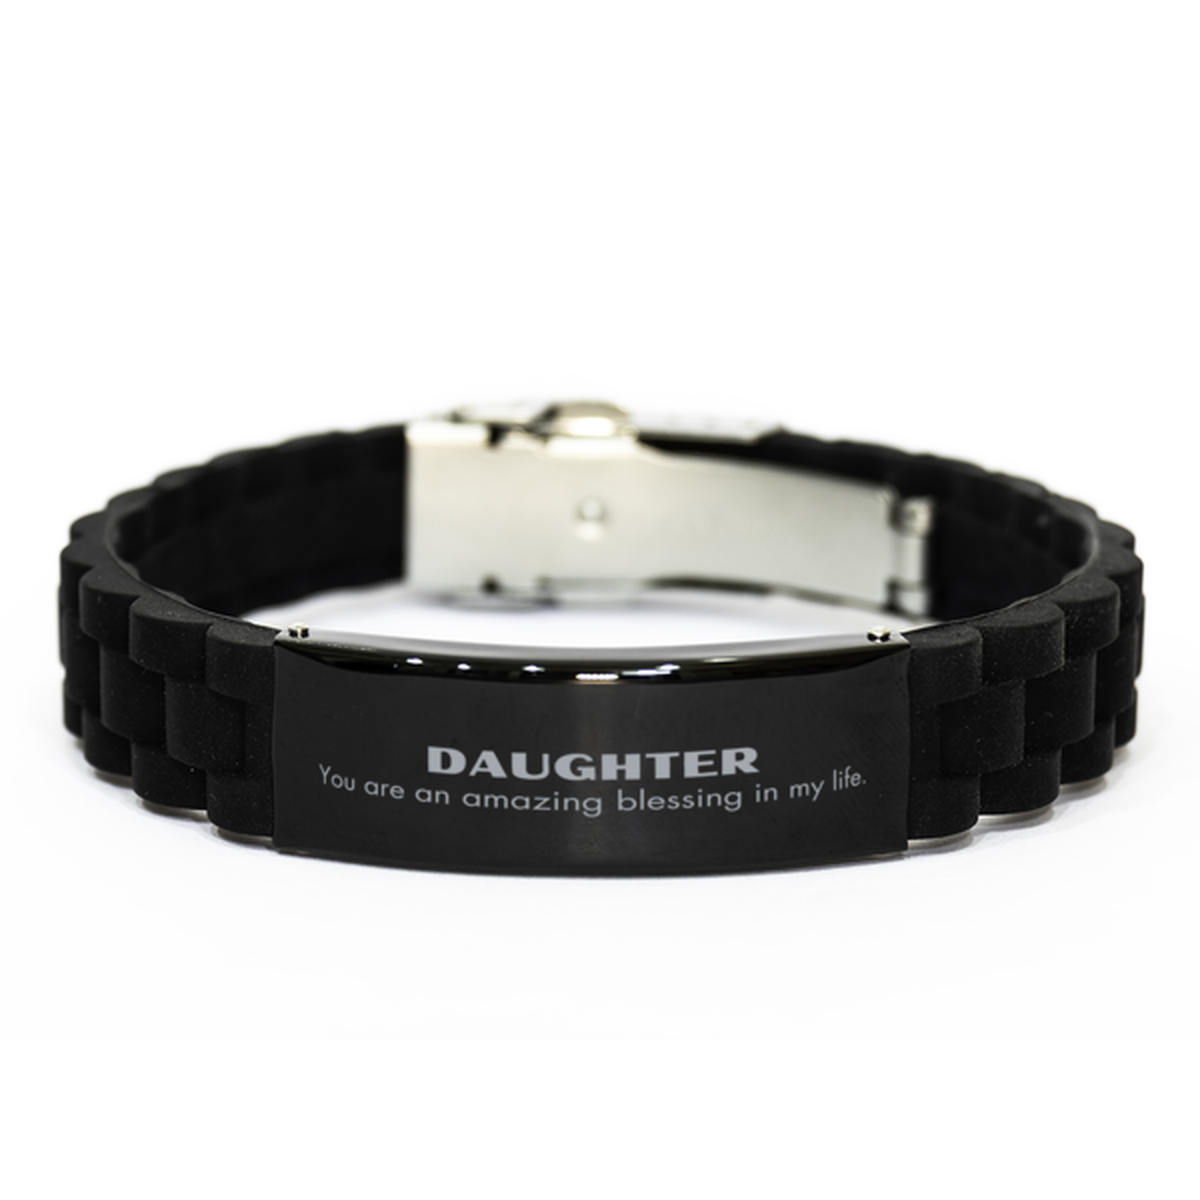 Daughter Black Glidelock Clasp Bracelet, You are an amazing blessing in my life, Thank You Gifts For Daughter, Inspirational Birthday Christmas Unique Gifts For Daughter